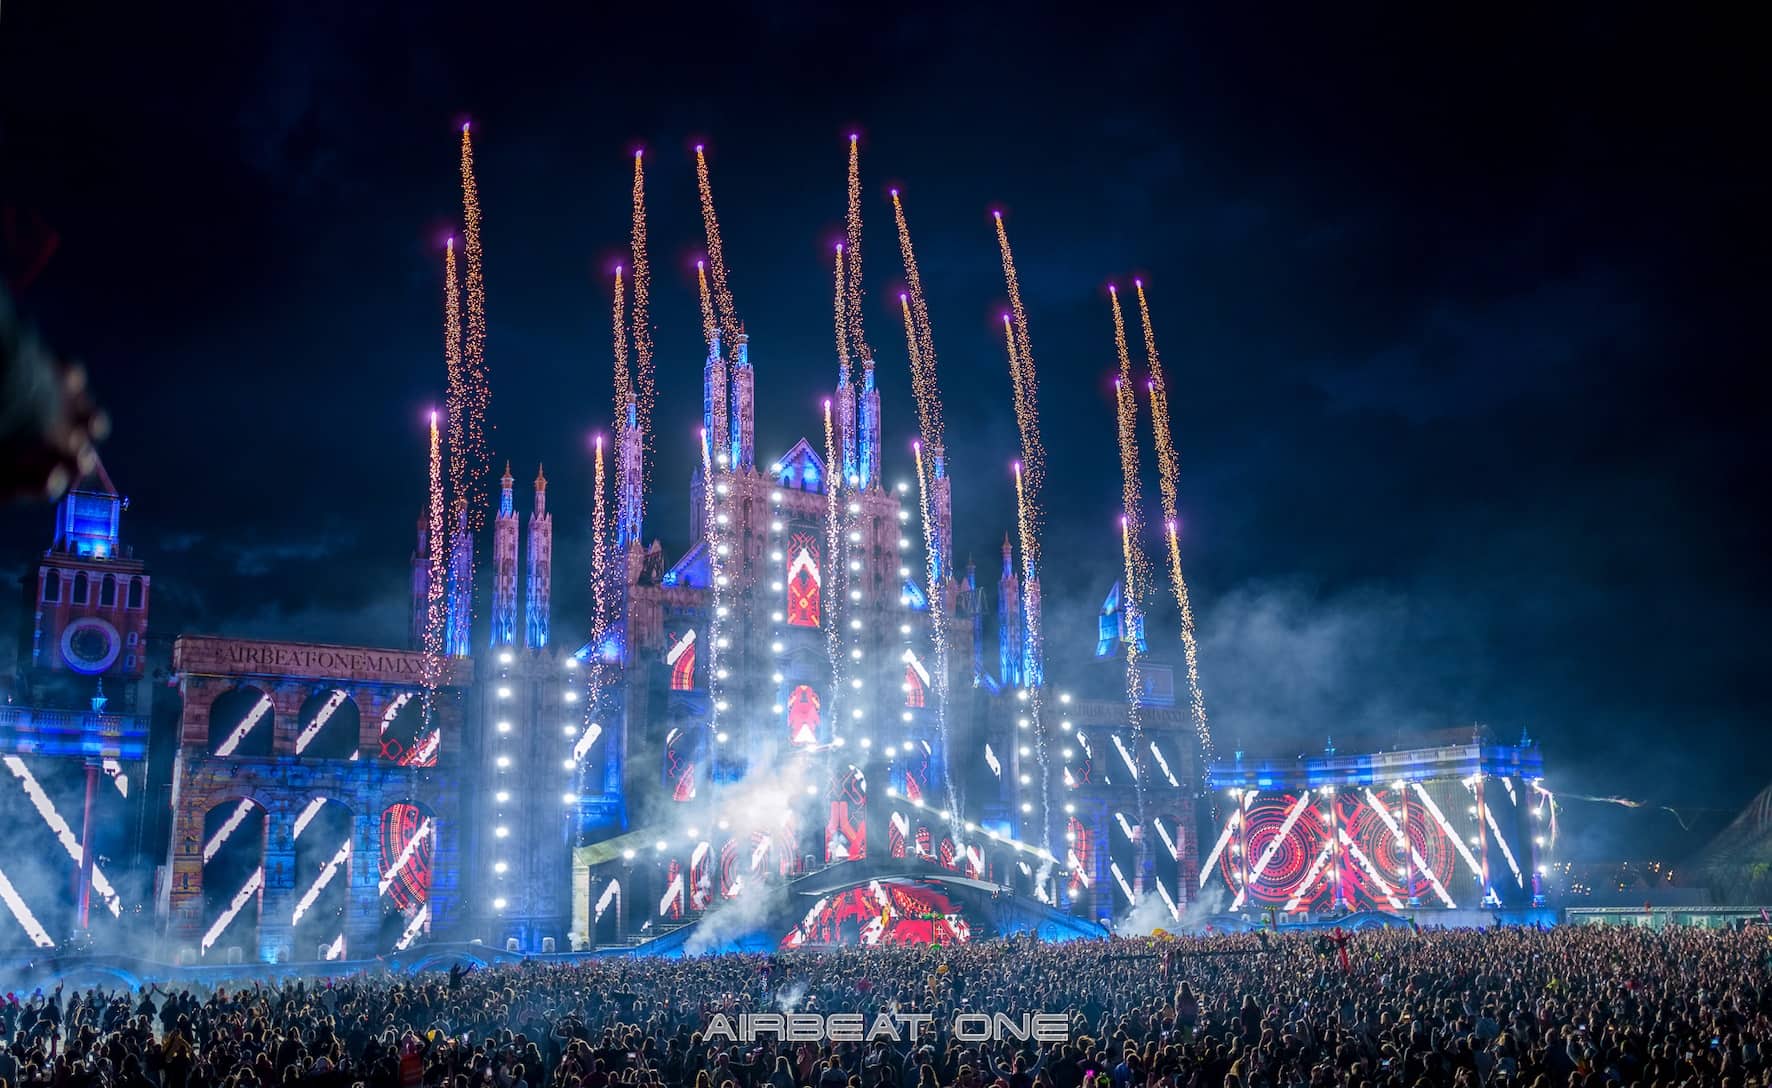 AIRBEAT ONE Festival announces more acts for 20th Anniversary event